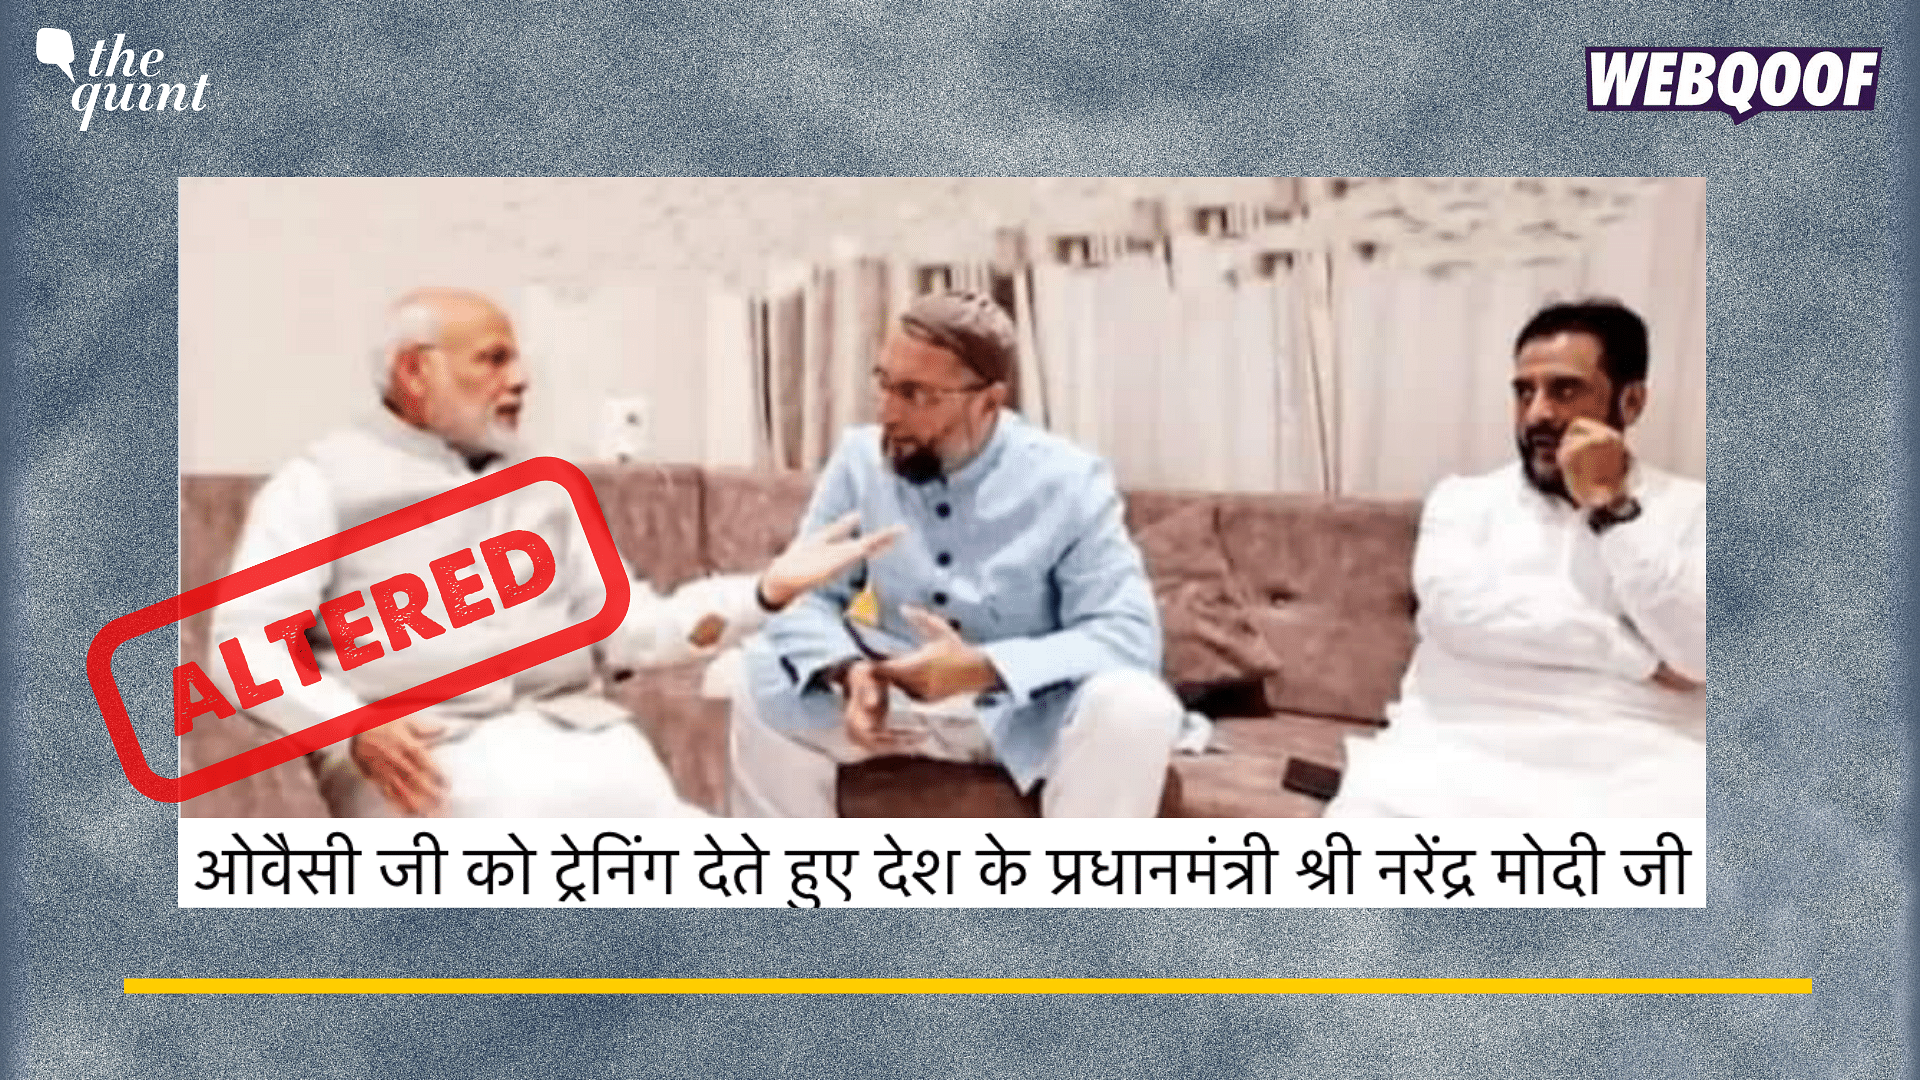 <div class="paragraphs"><p>Fact-Check: This image of Prime Minister Narendra Modi with the AIMIM Chief&nbsp;Asaduddin Owaisi is digitally altered.&nbsp;</p></div>